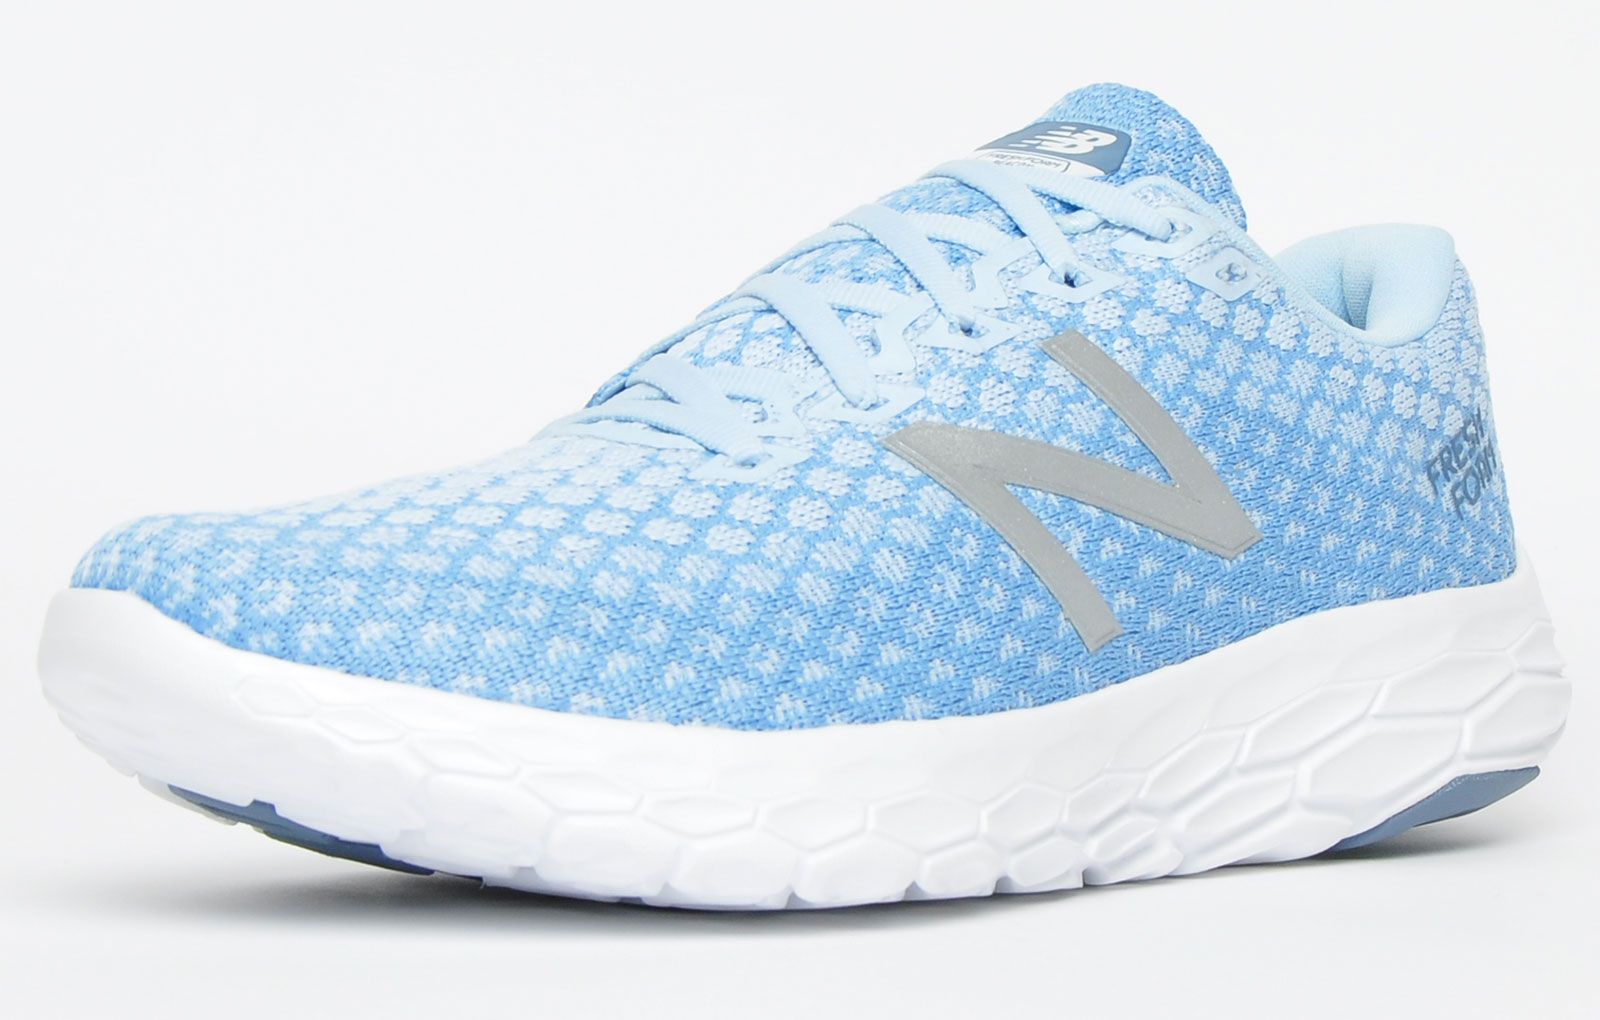 The New Balance Fresh Foam Beacon is a neutral running shoe featuring an engineered knit material with fresh foam technology to provide long-lasting cushioning throughout the run. <p class=